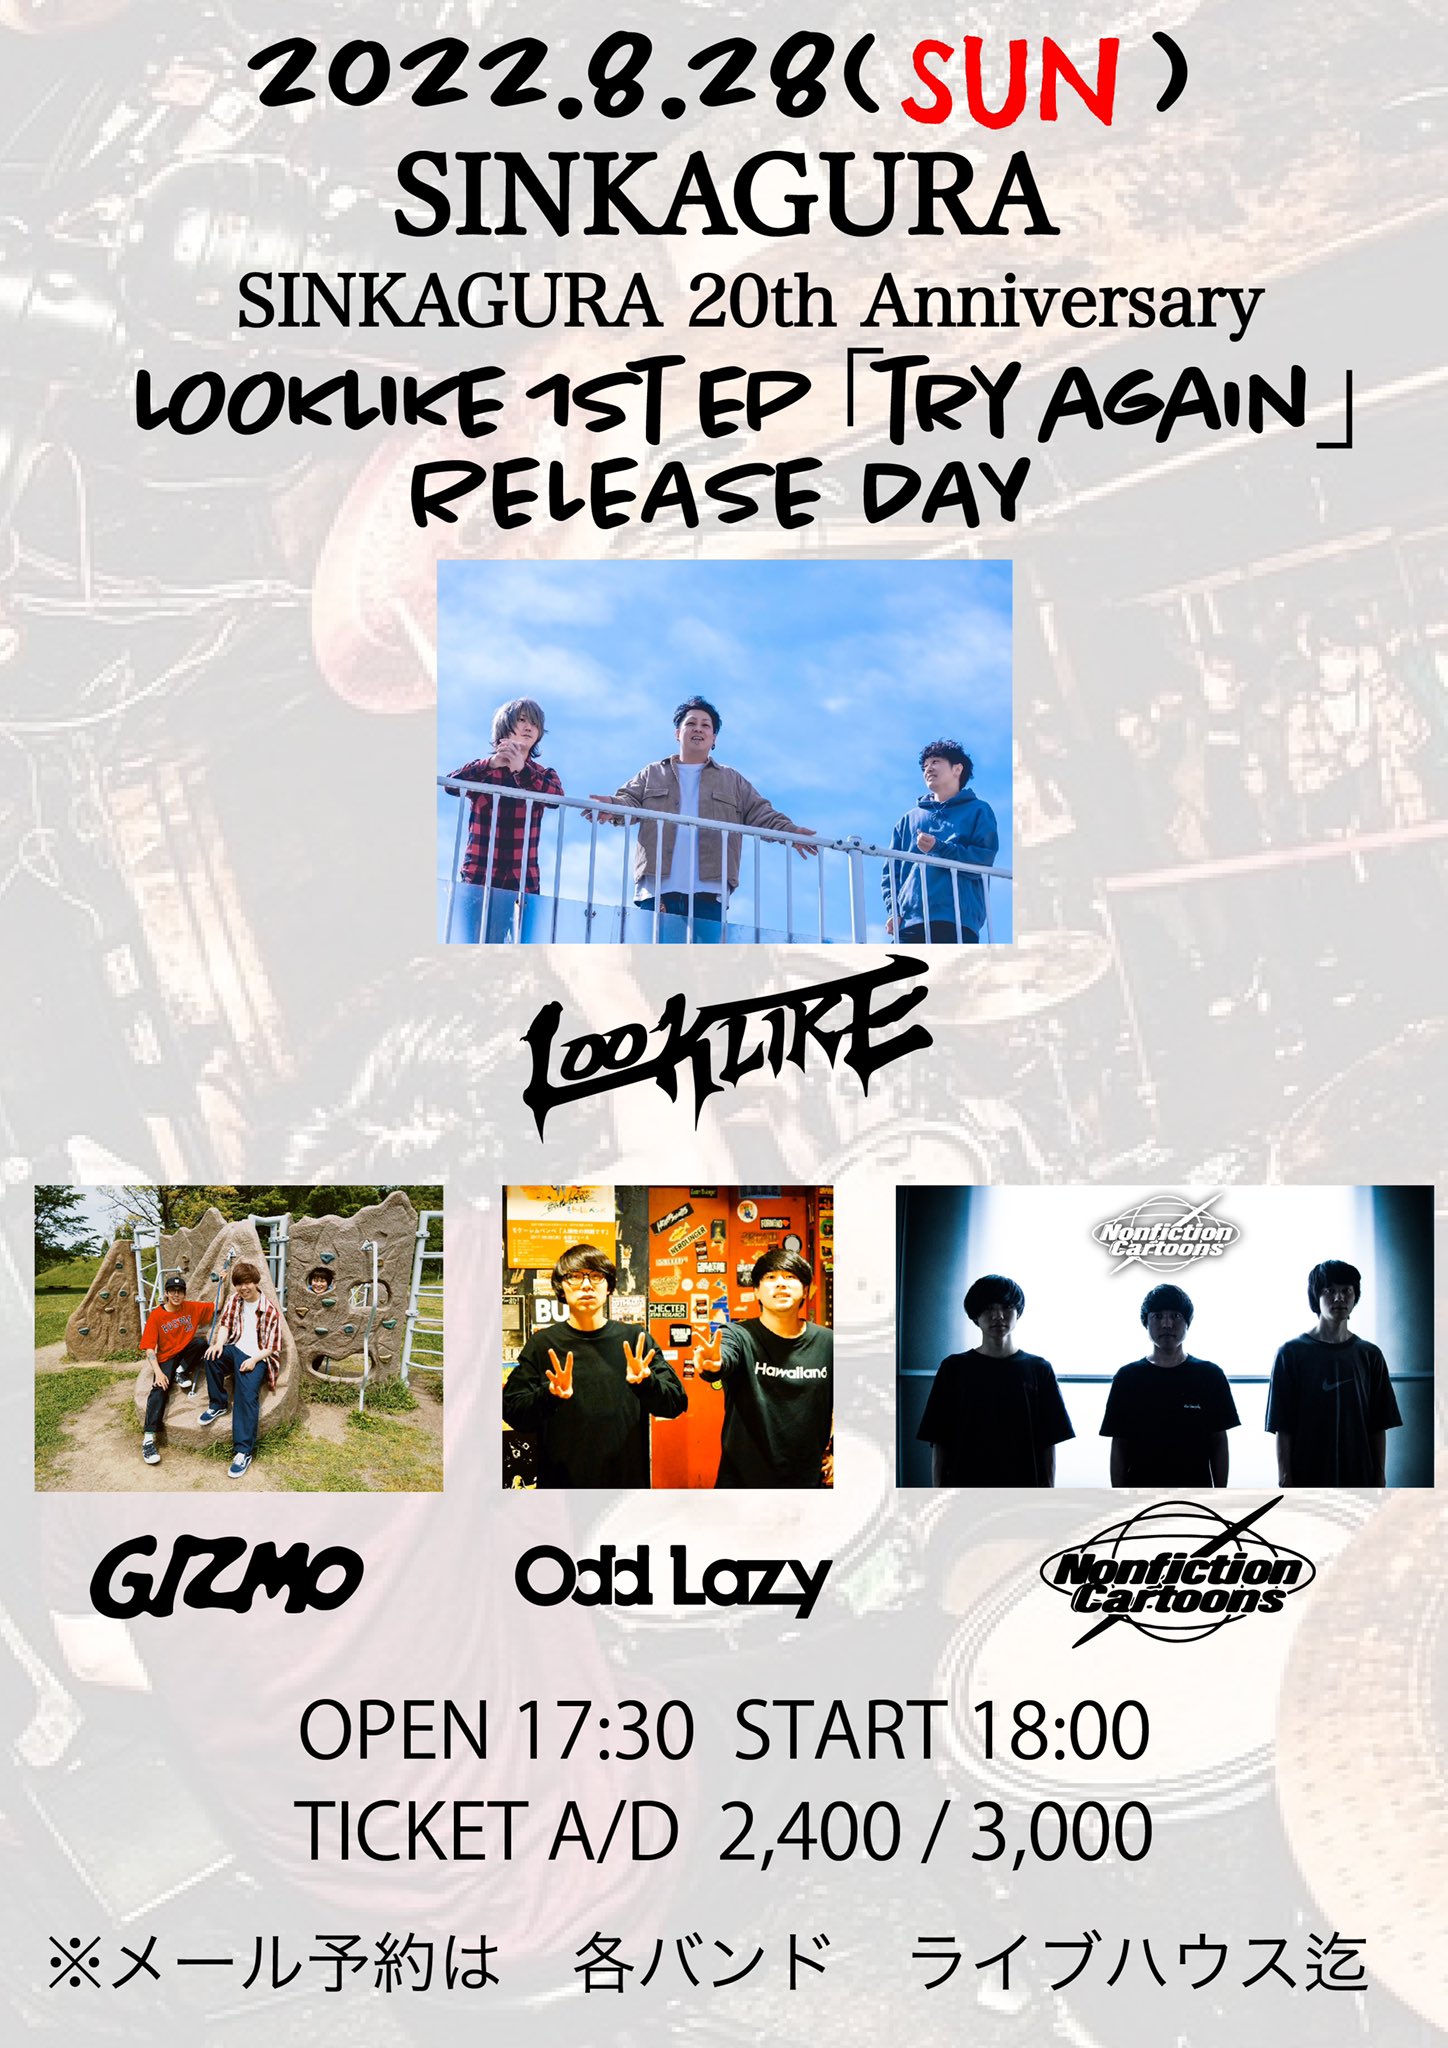 LOOKLIKE 1st EP『try again』RELEASE DAY